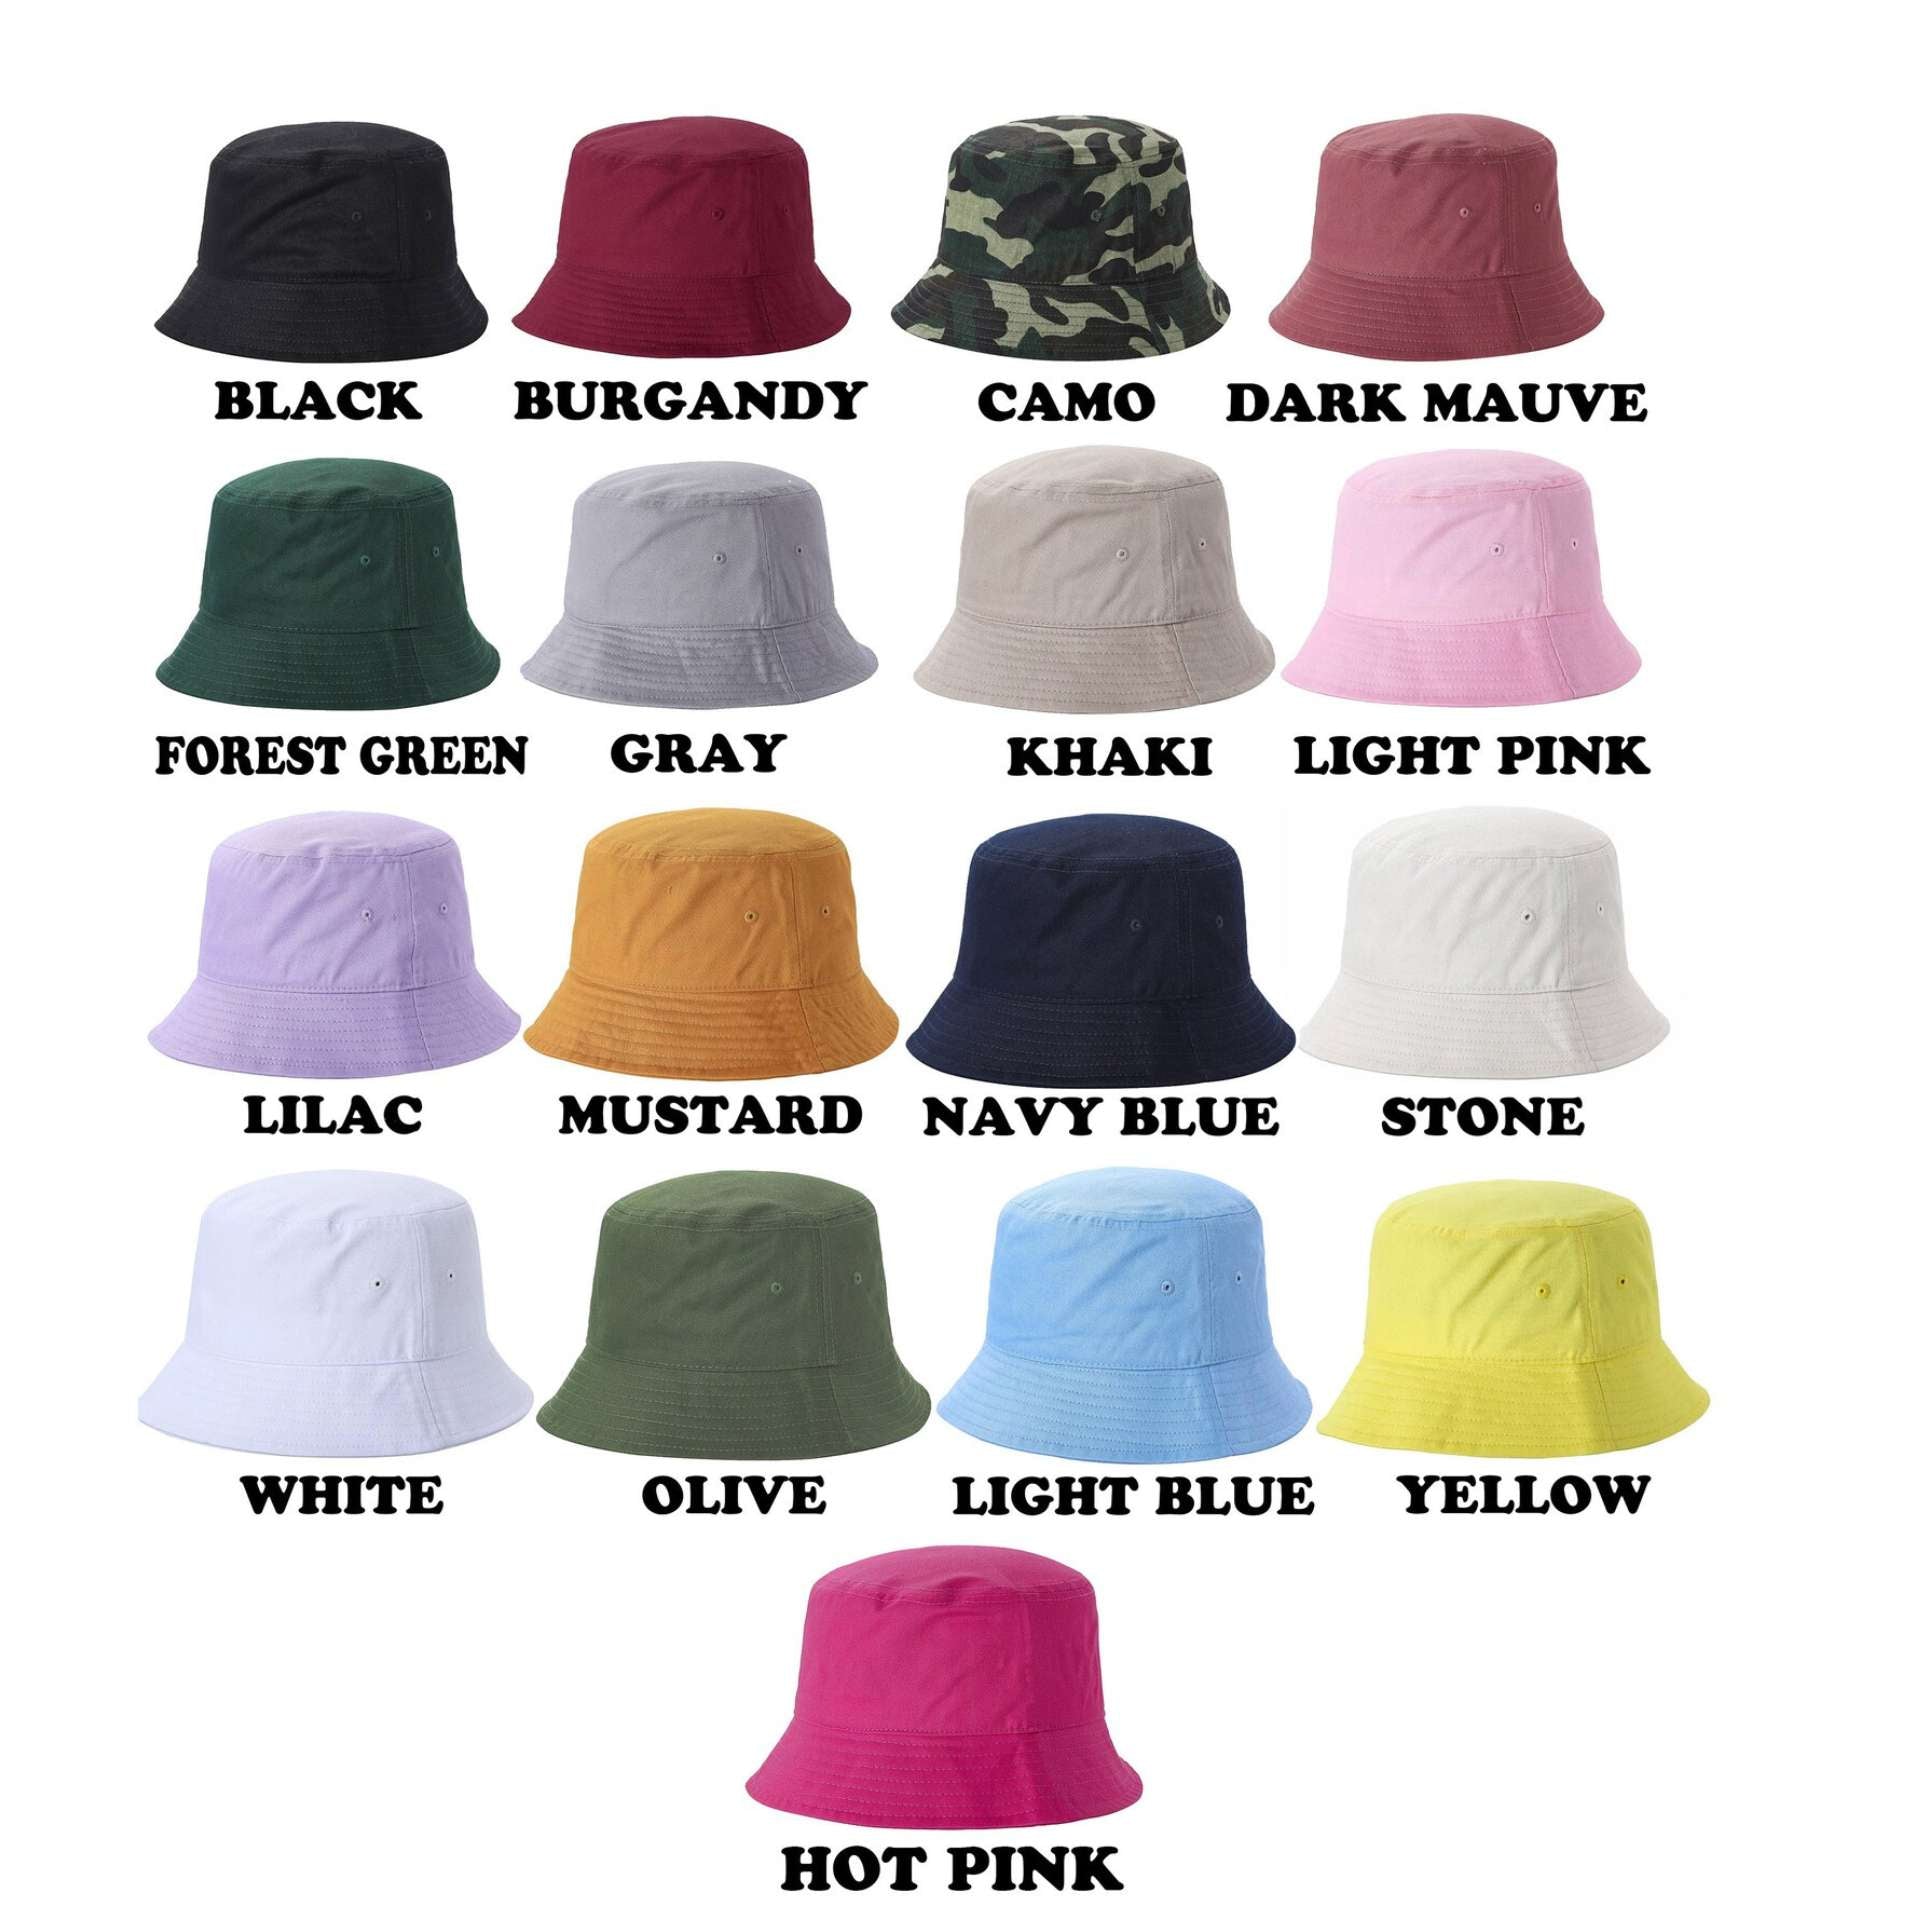 DSY Lifestyle Bucket Hat Color Chart